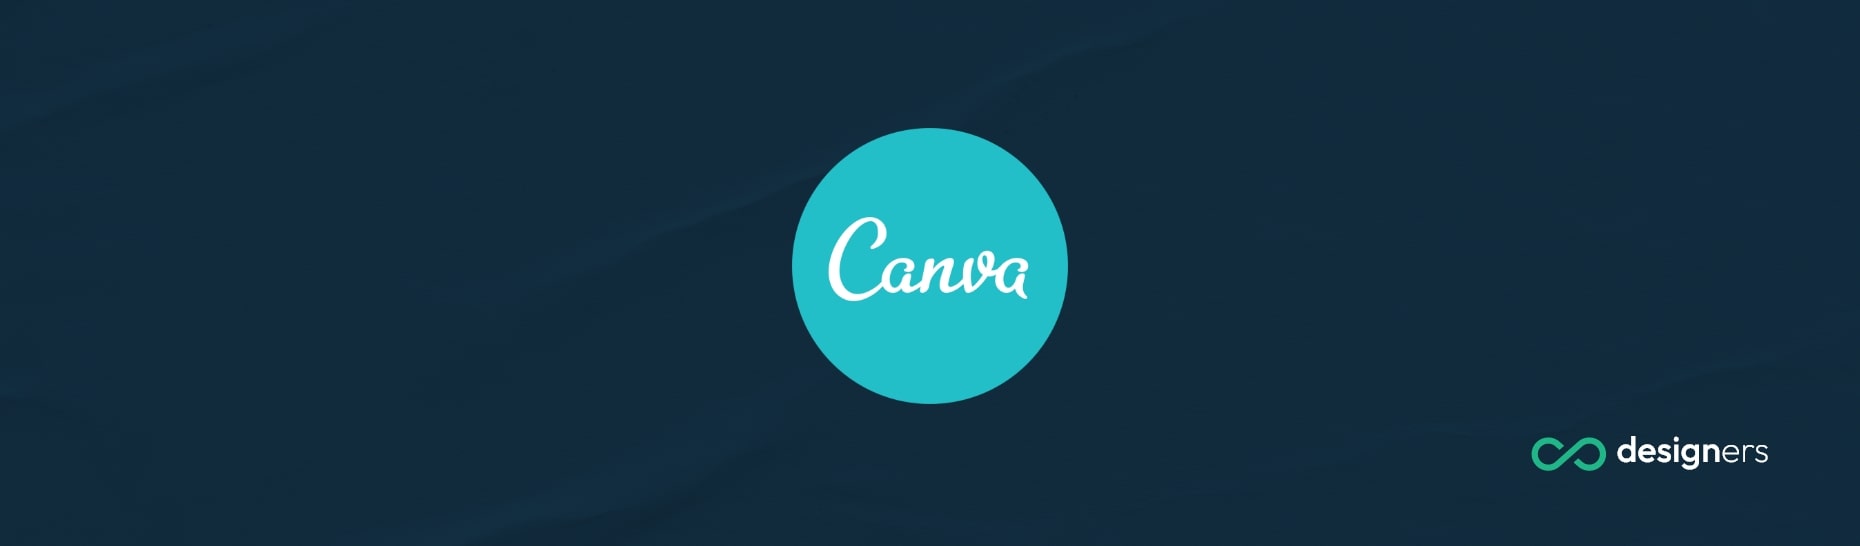 How Do I Change My Logo From Black to White in Canva?